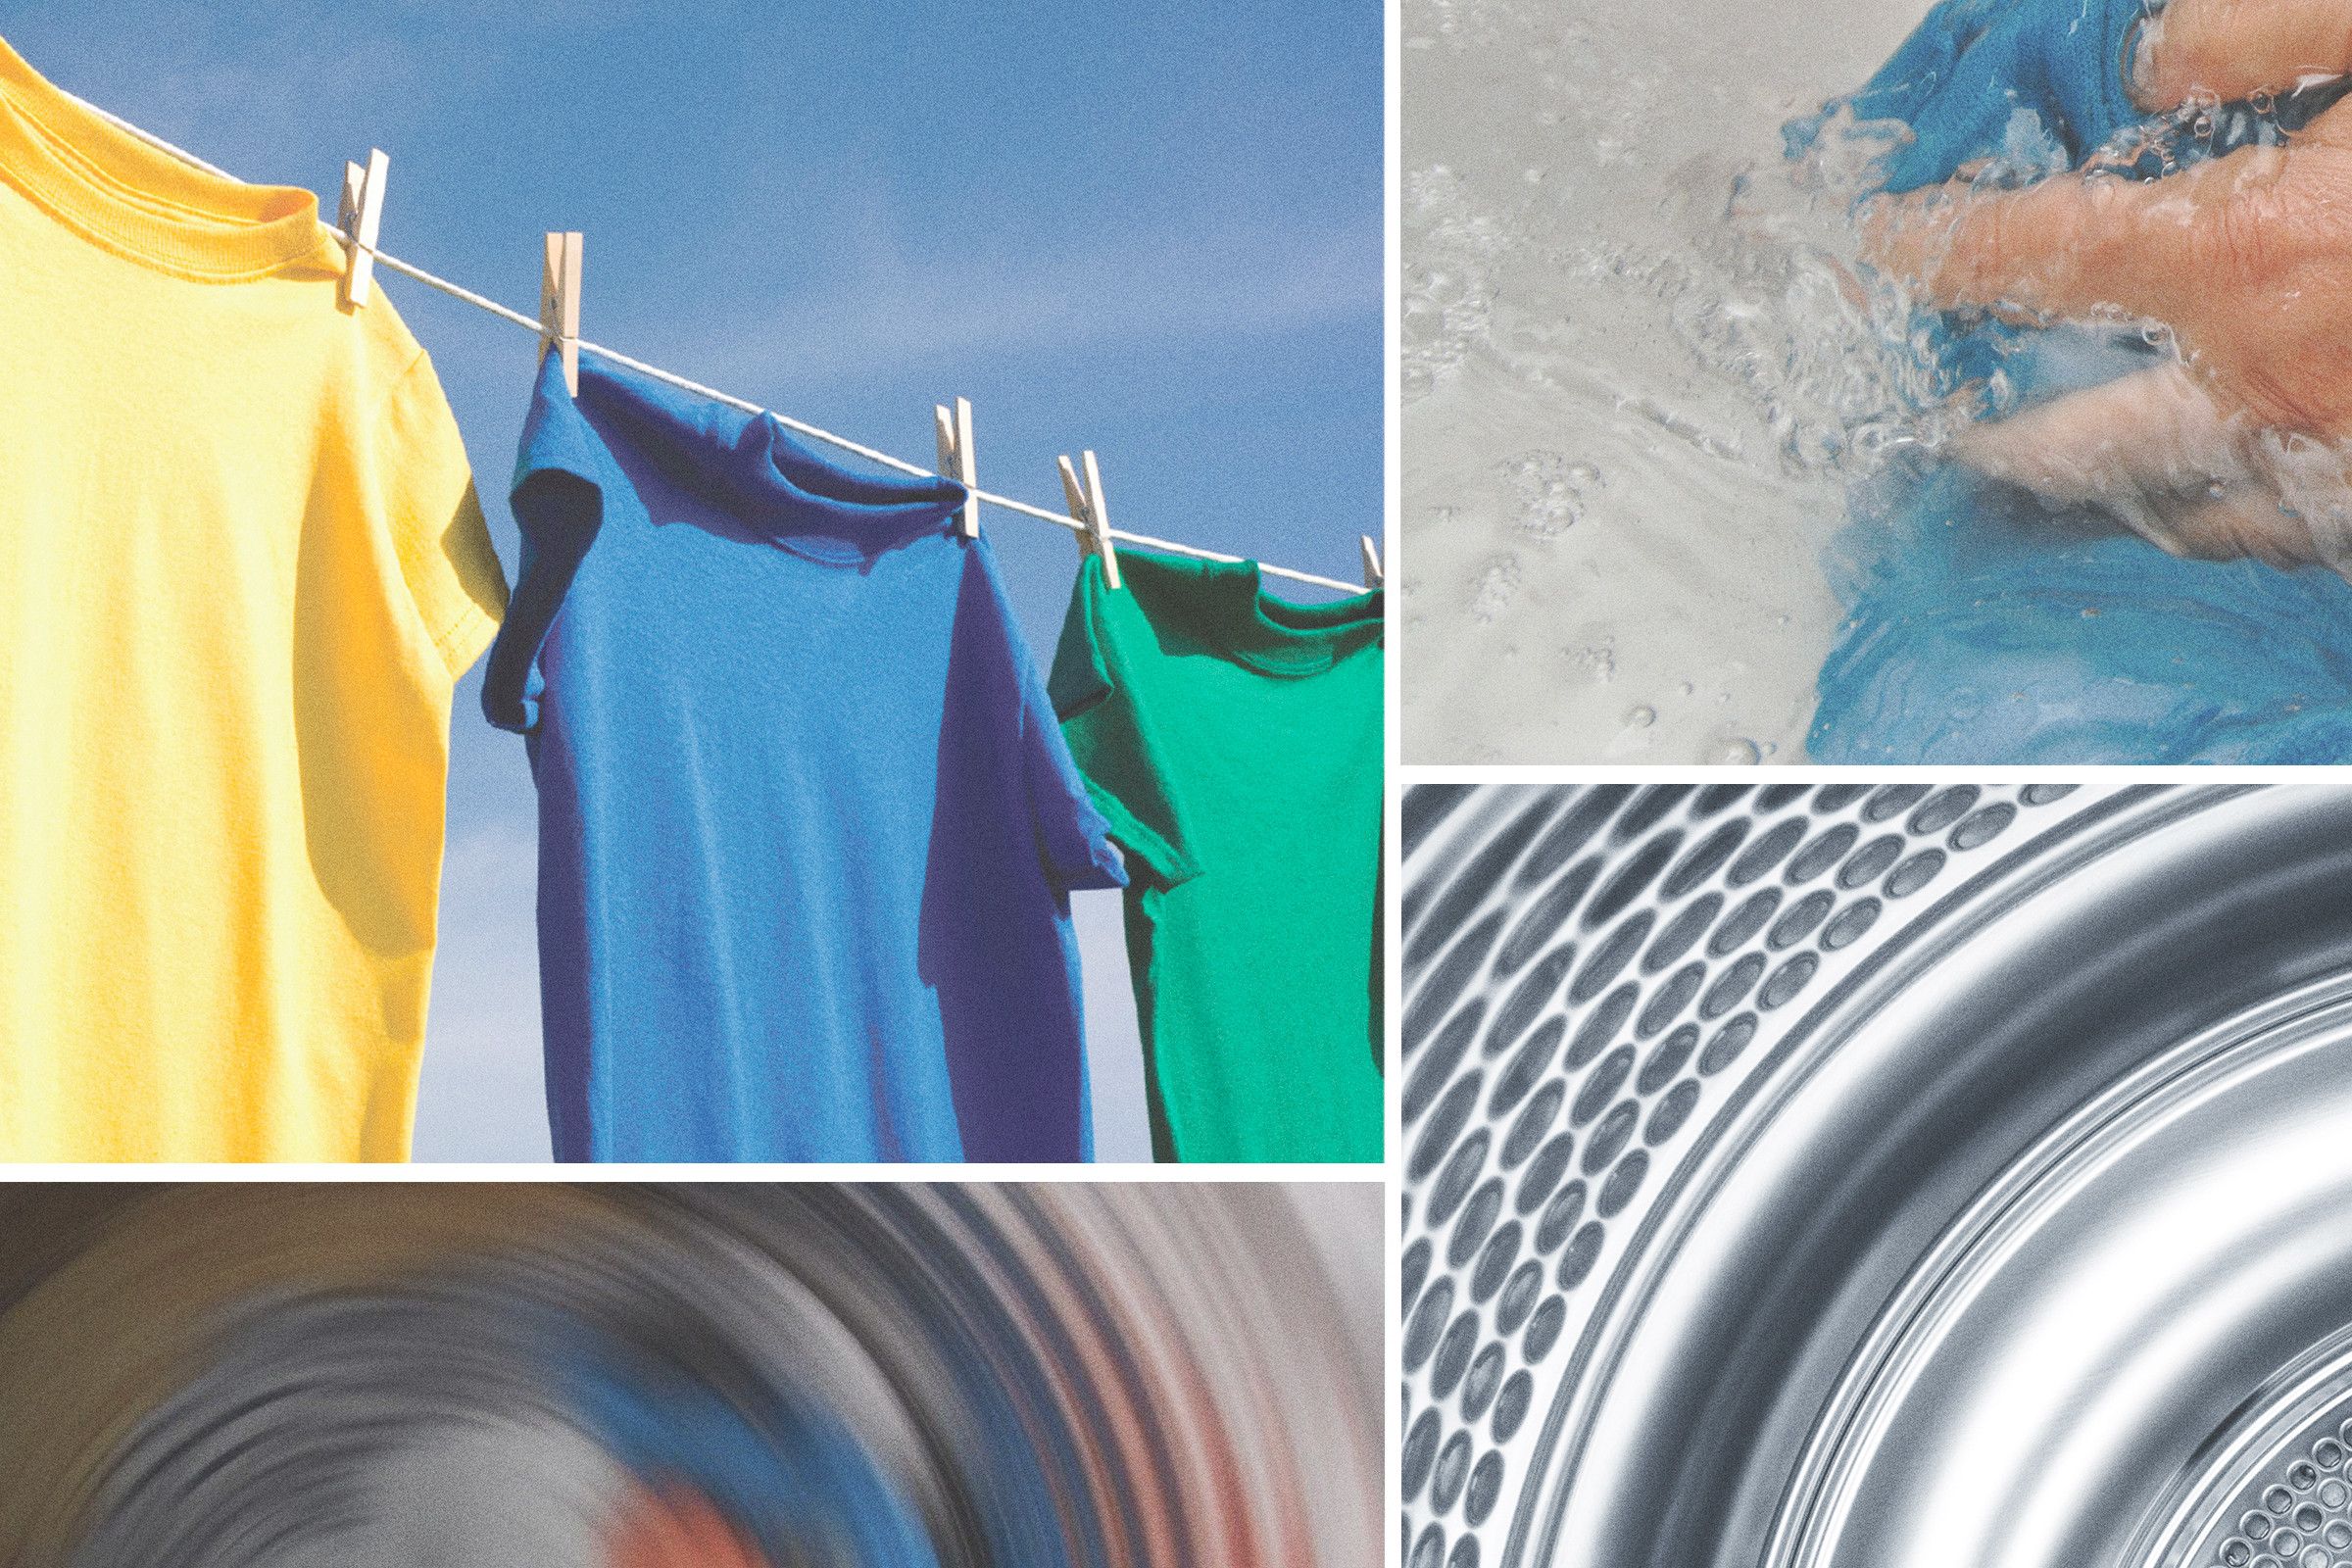 How to Disinfect and Launder Clothing